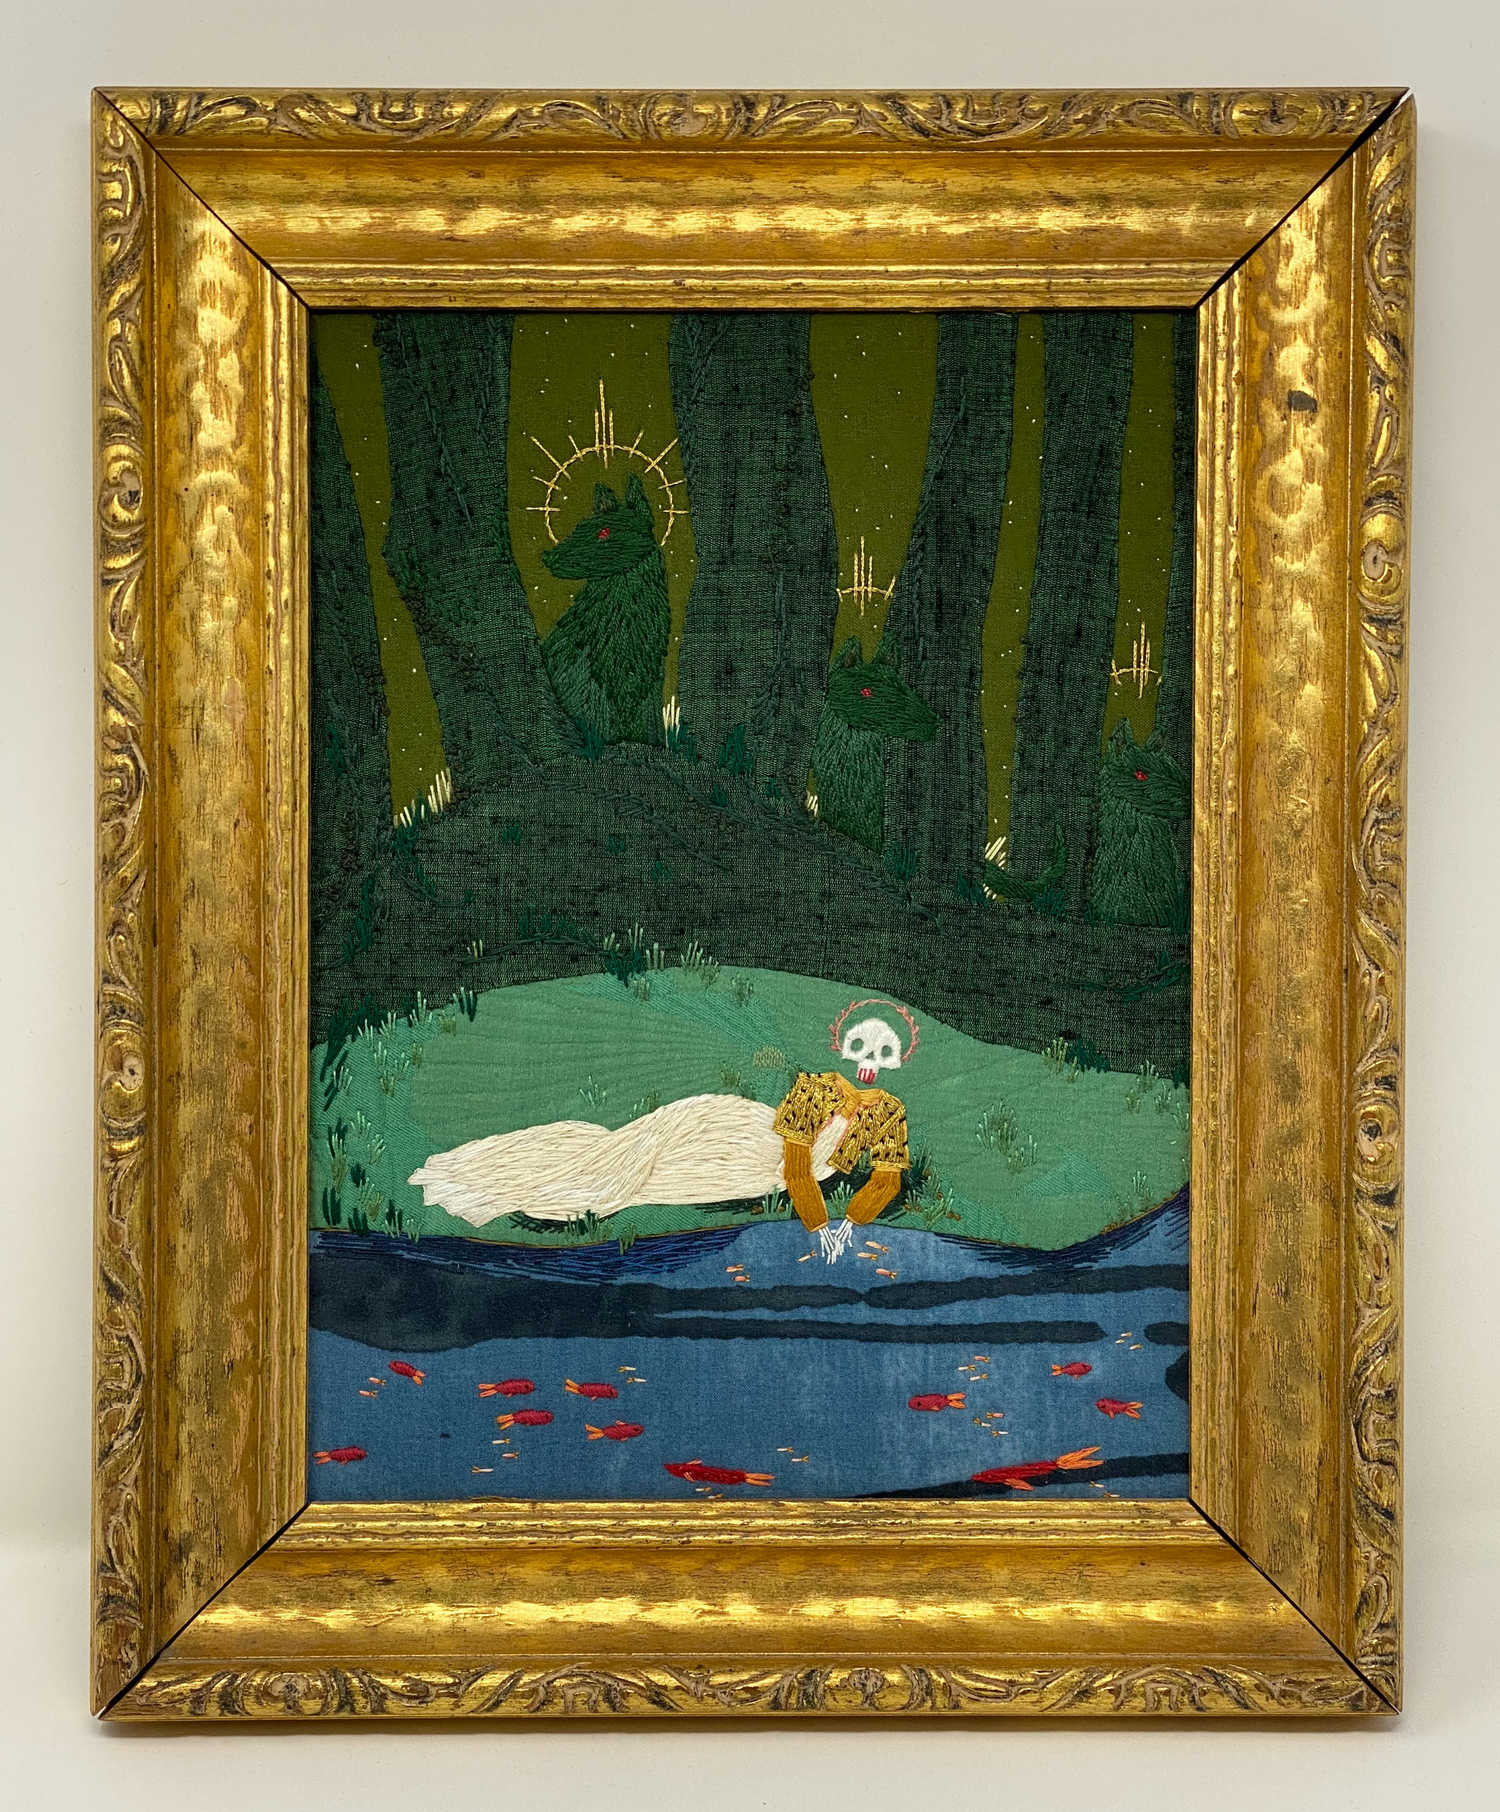 LARGE GOLD FRAME WITH GREEN FABRIC TREES AND HILL. GREEN DOGS ARE HIDDEN IN THE TREES WITH GOLD HALOS AROUND THEM. THERE IS A SKULL FACED PERSON IN A GOLD COAT AND WHITE DRESS LAYING NEXT TO A STREAM WITH RED FISH. THIS IS ALL HAND EMBROIDERY ON FABRIC. 